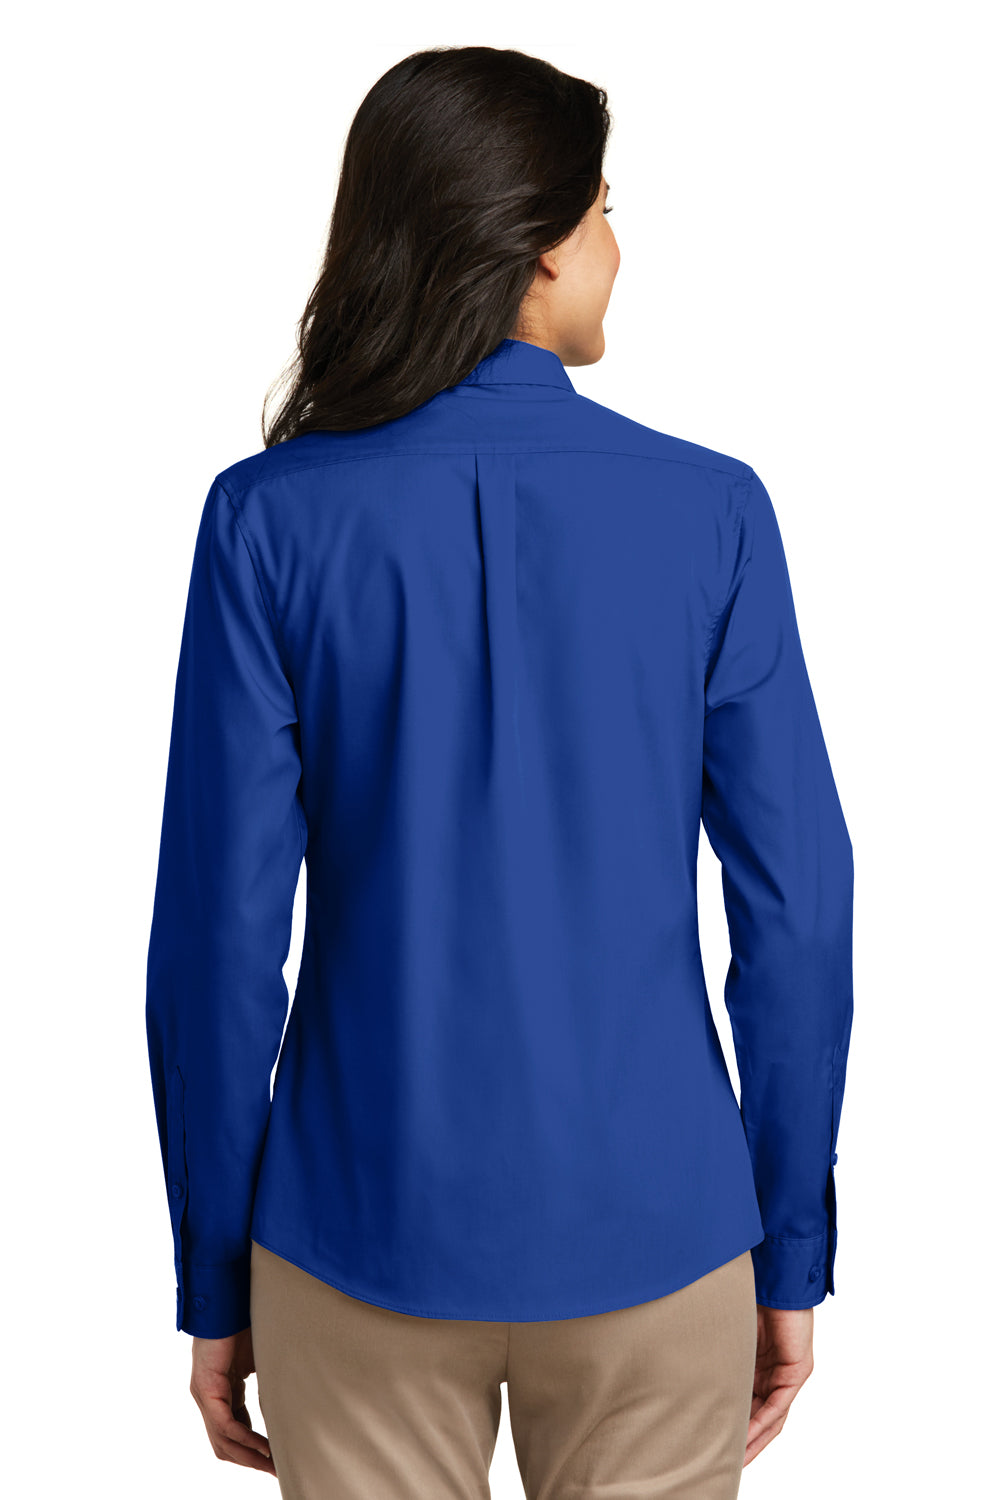 Port Authority LW100 Womens Carefree Stain Resistant Long Sleeve Button Down Shirt True Royal Blue Back